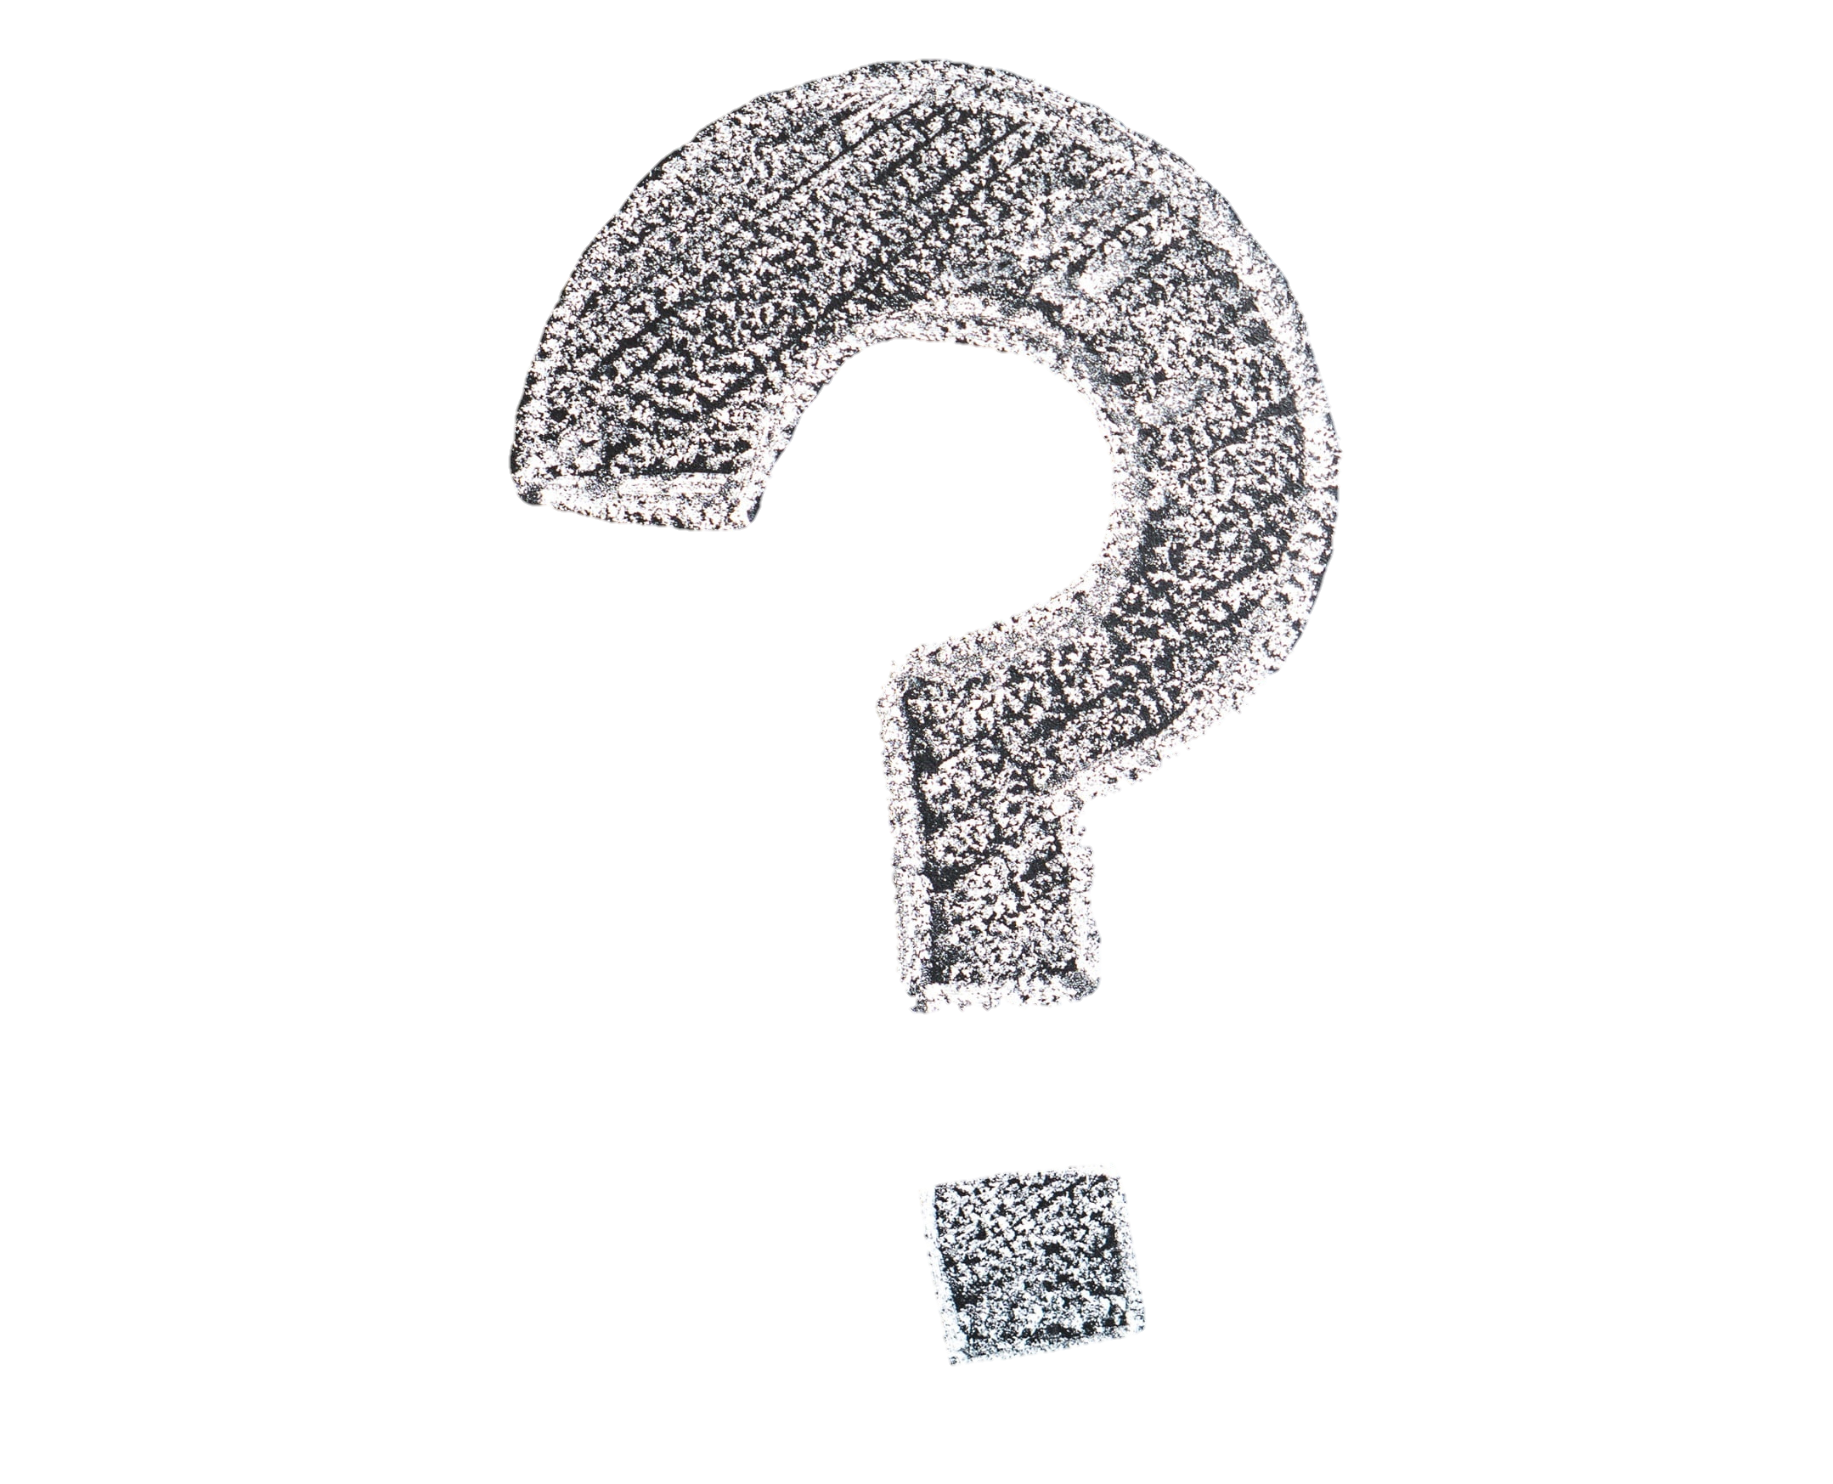 question-mark-png-from-pngfre-11-1